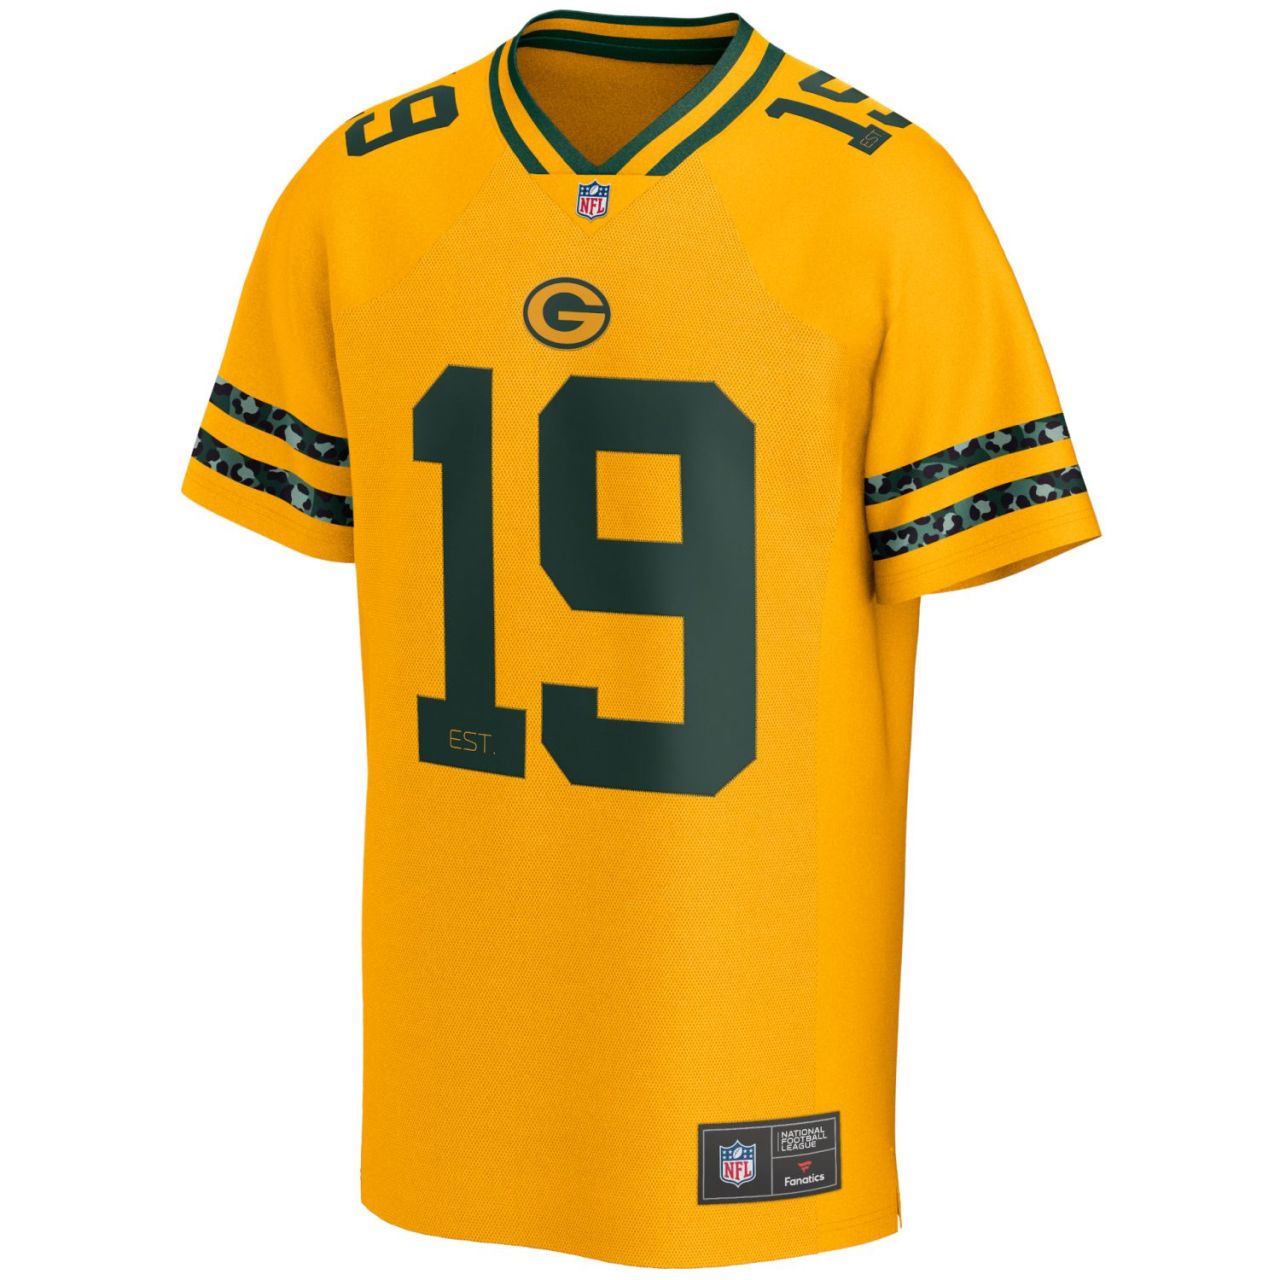 Green Bay Packers NFL Poly Mesh Supporters Jersey animal von Fanatics